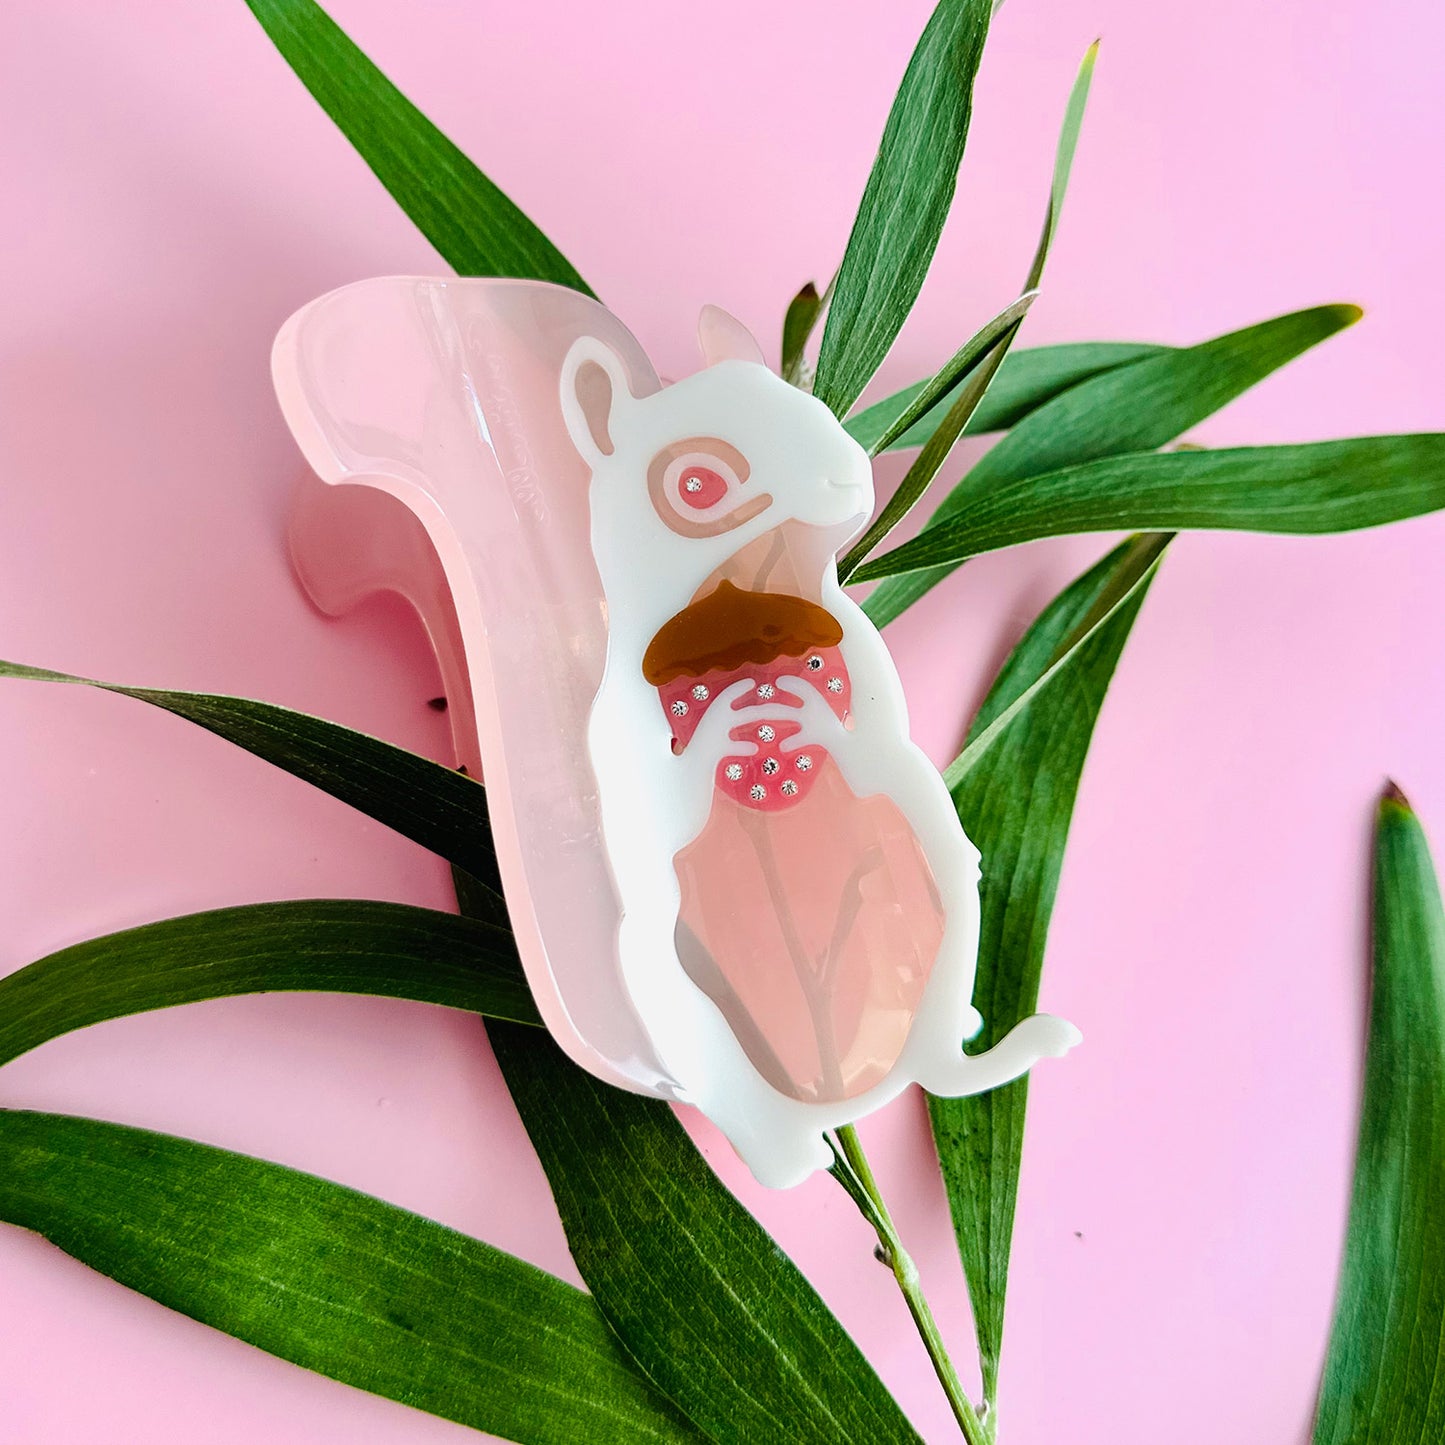 Pink squirrel centinelle hair claw clip from hair accessories collection.